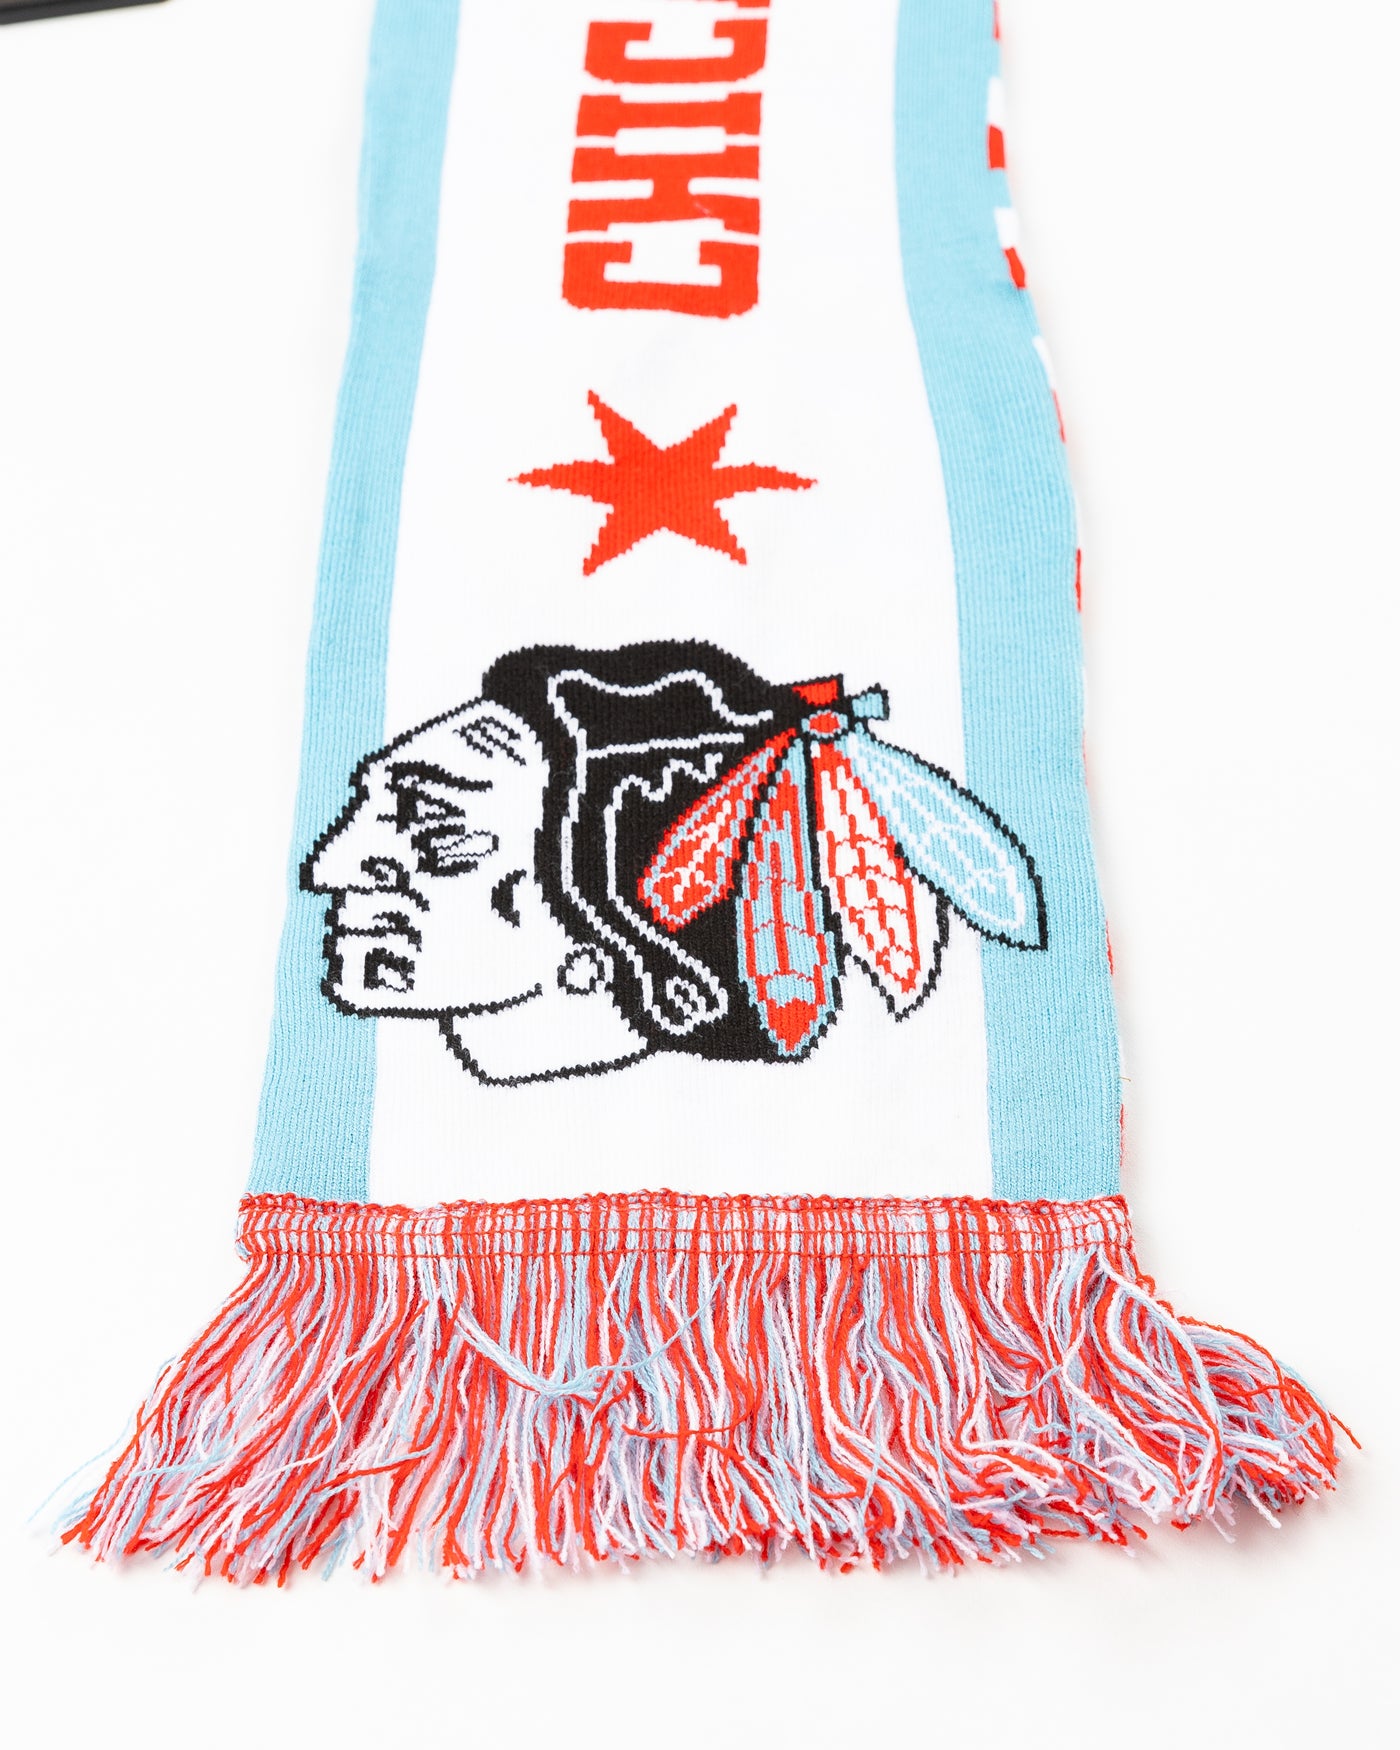 white scarf with Chicago Blackhawks branding in Chicago flag inspired colorway - detail lay flat